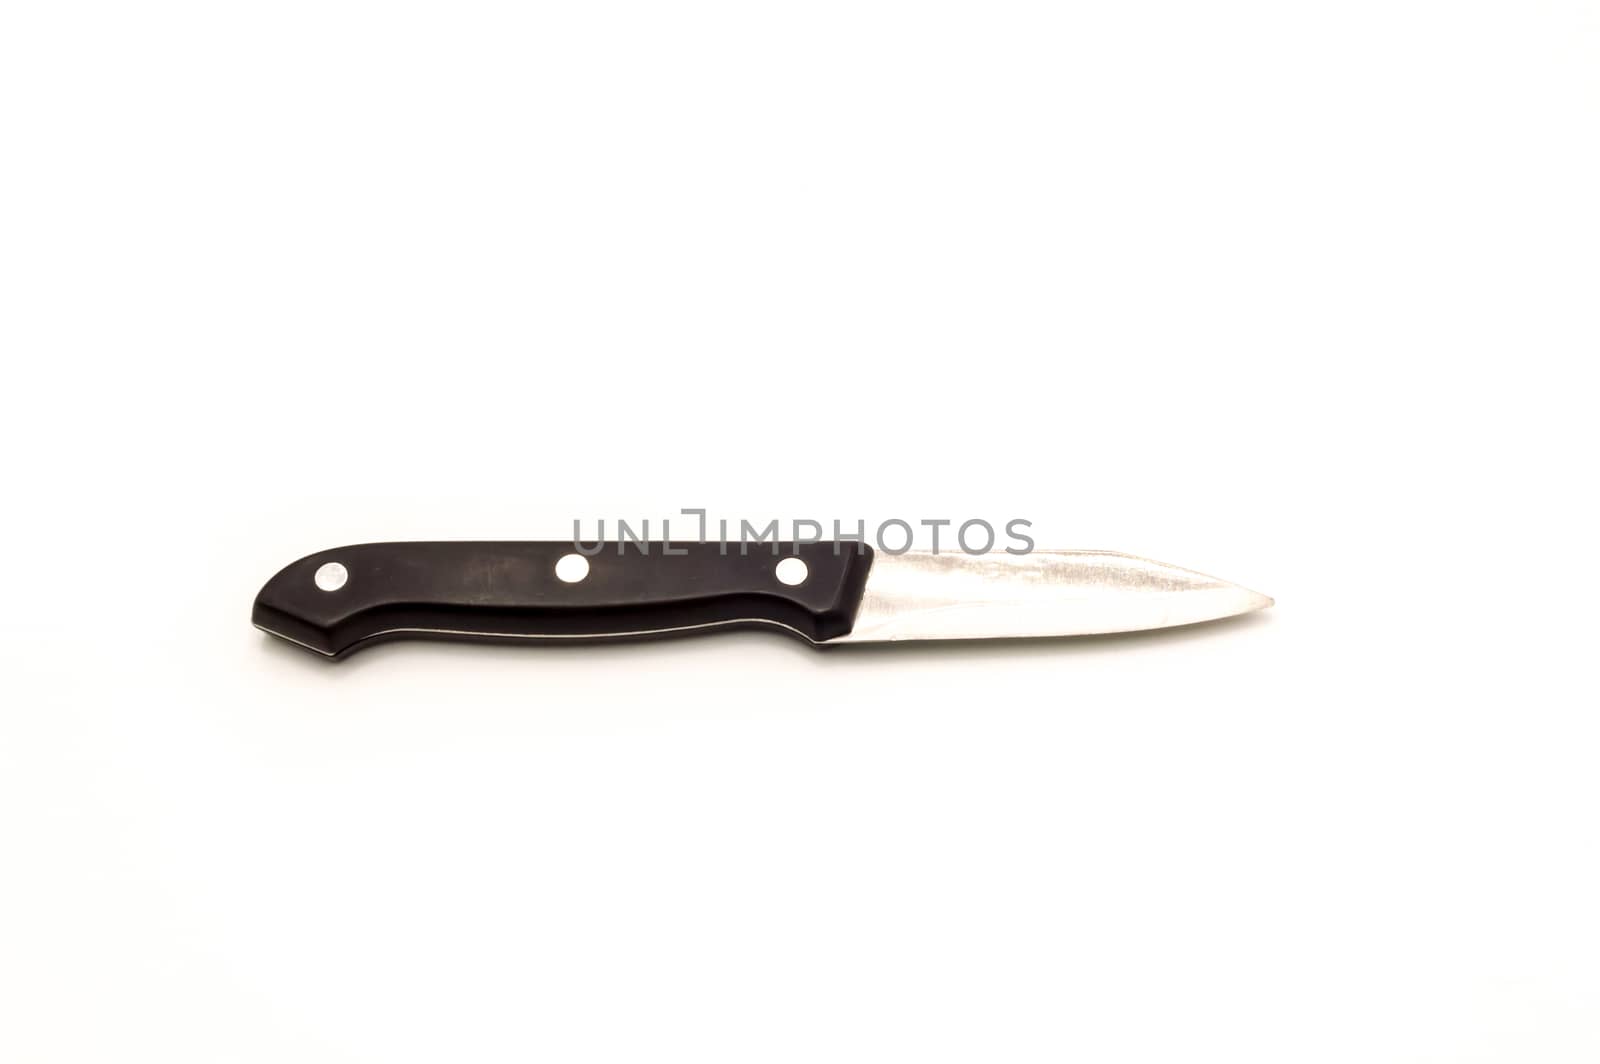 A small knife spins with a black wooden handle, isolated on a white background